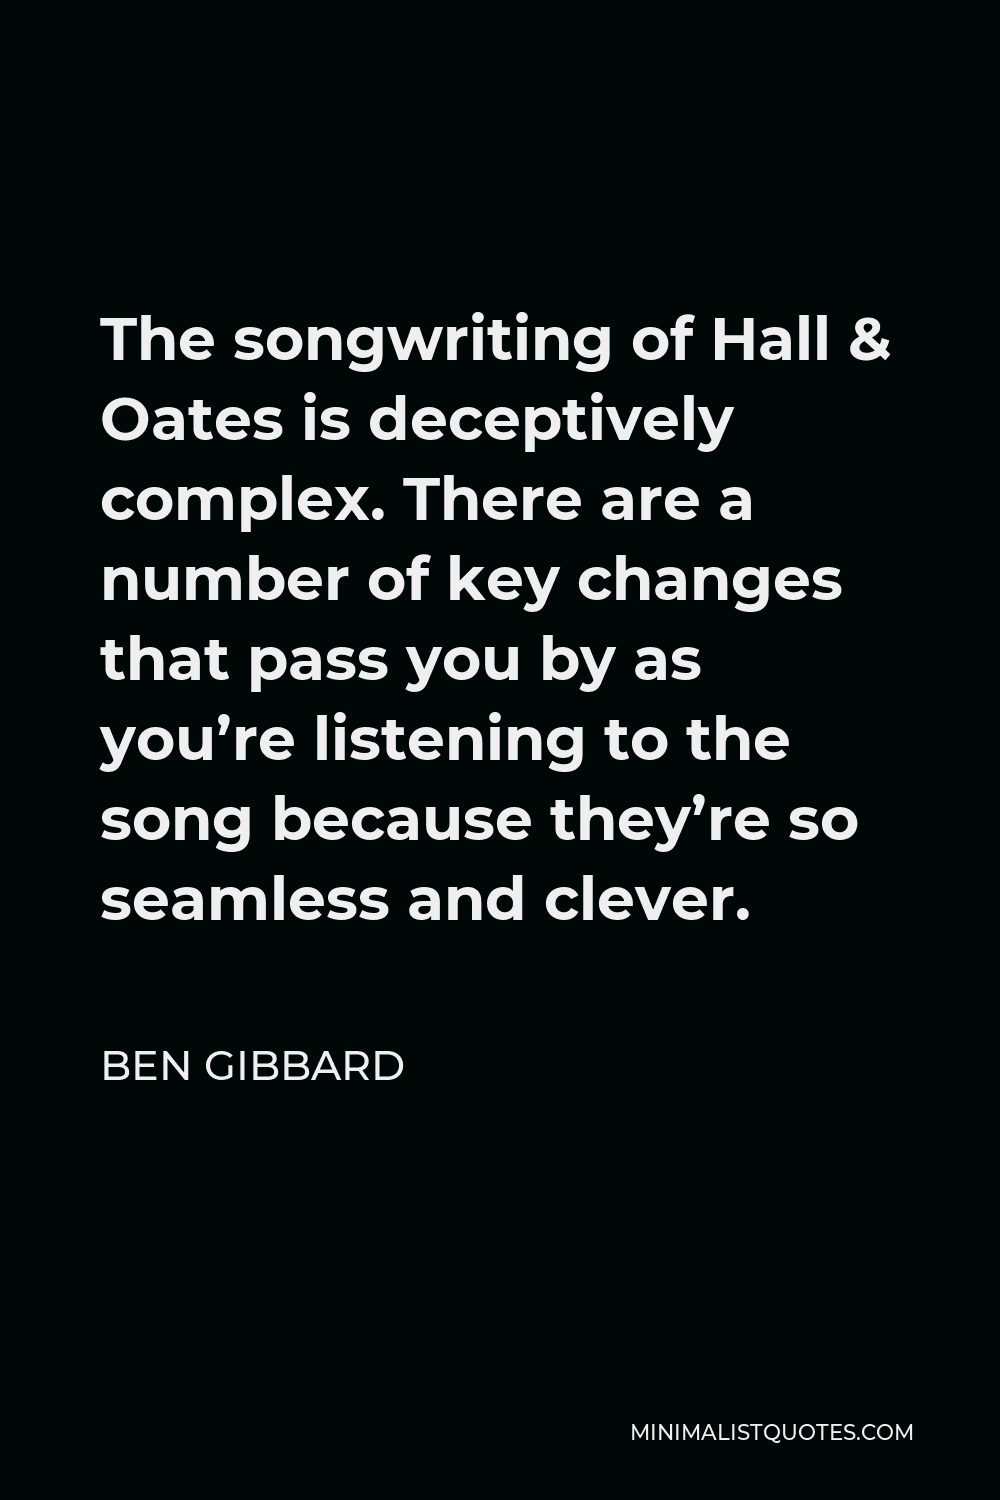 Ben Gibbard Quote - The songwriting of Hall & Oates is deceptively complex. There are a number of key changes that pass you by as you’re listening to the song because they’re so seamless and clever.